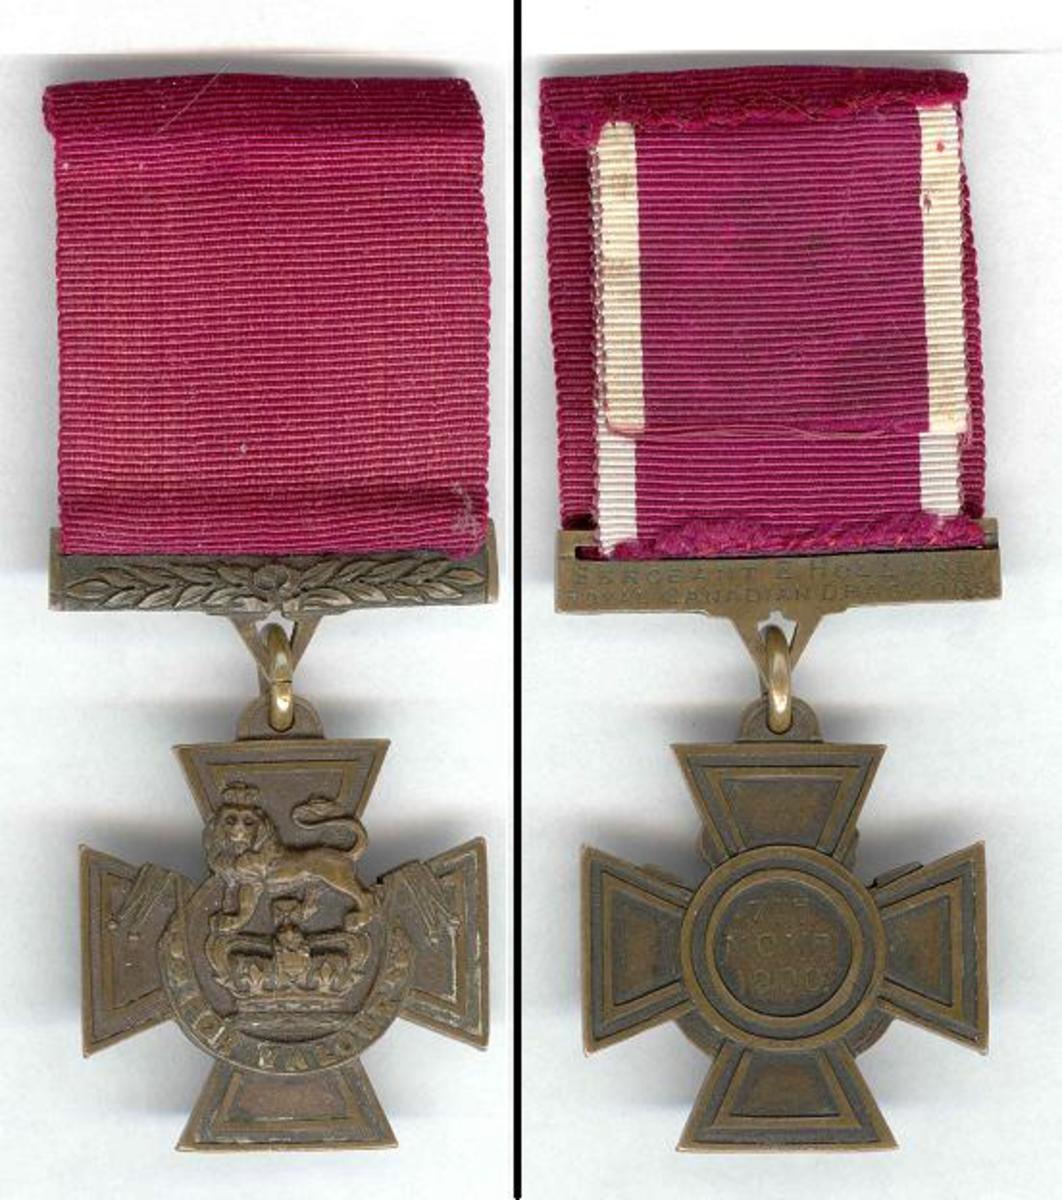 The front and back of a Victoria Cross Medal